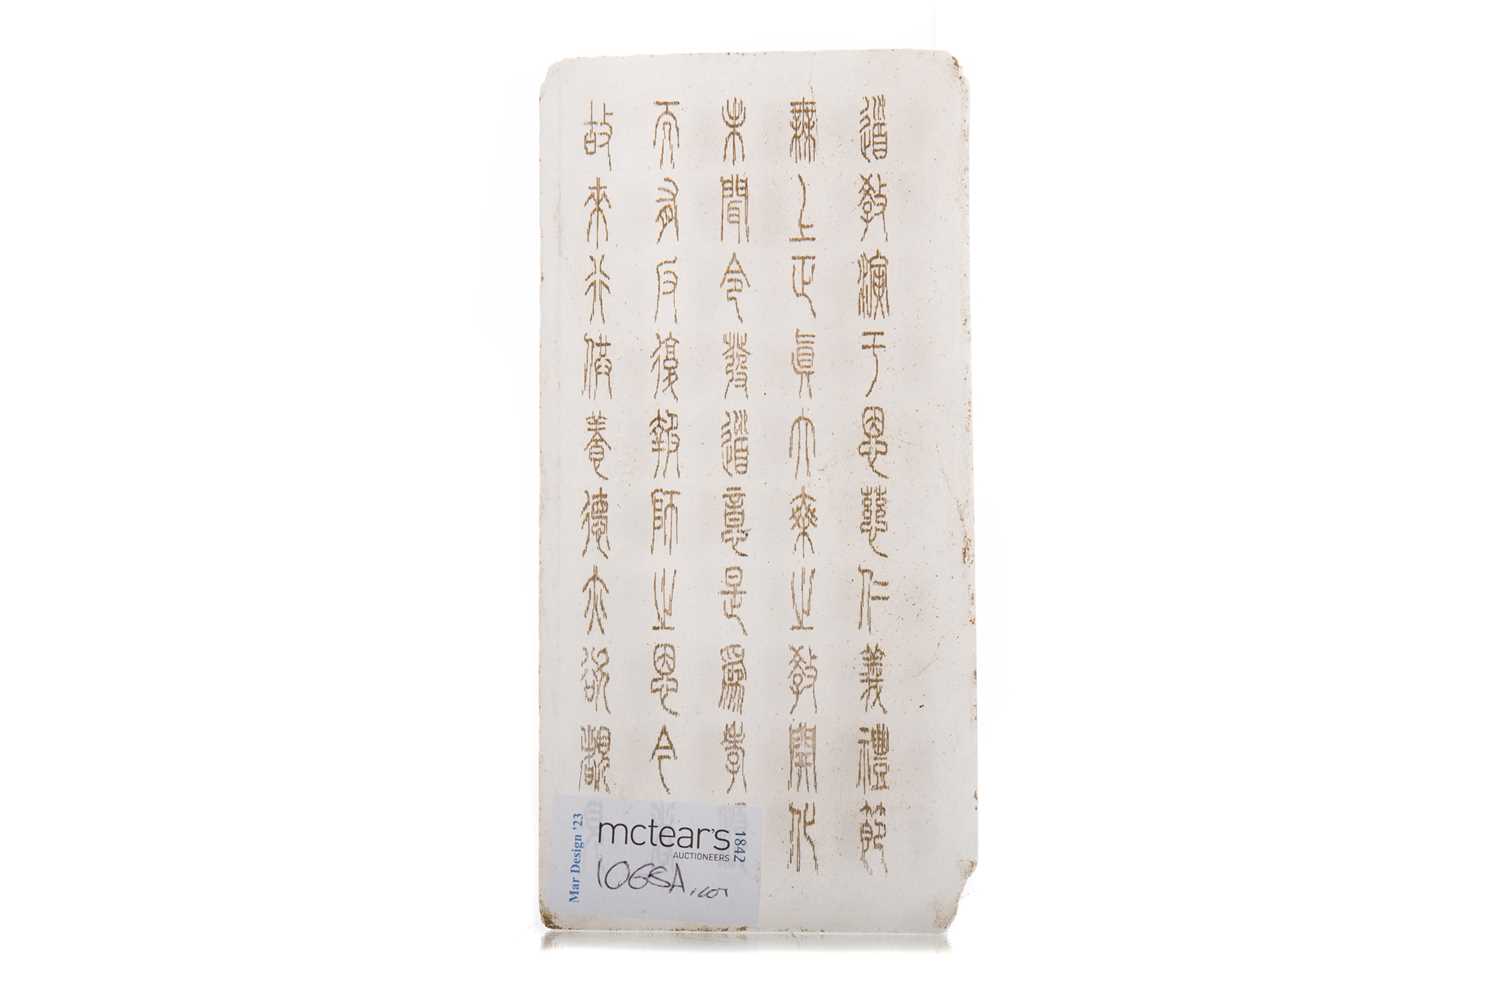 Lot 1068 - CHINESE ARTICULATED JADE AMULET